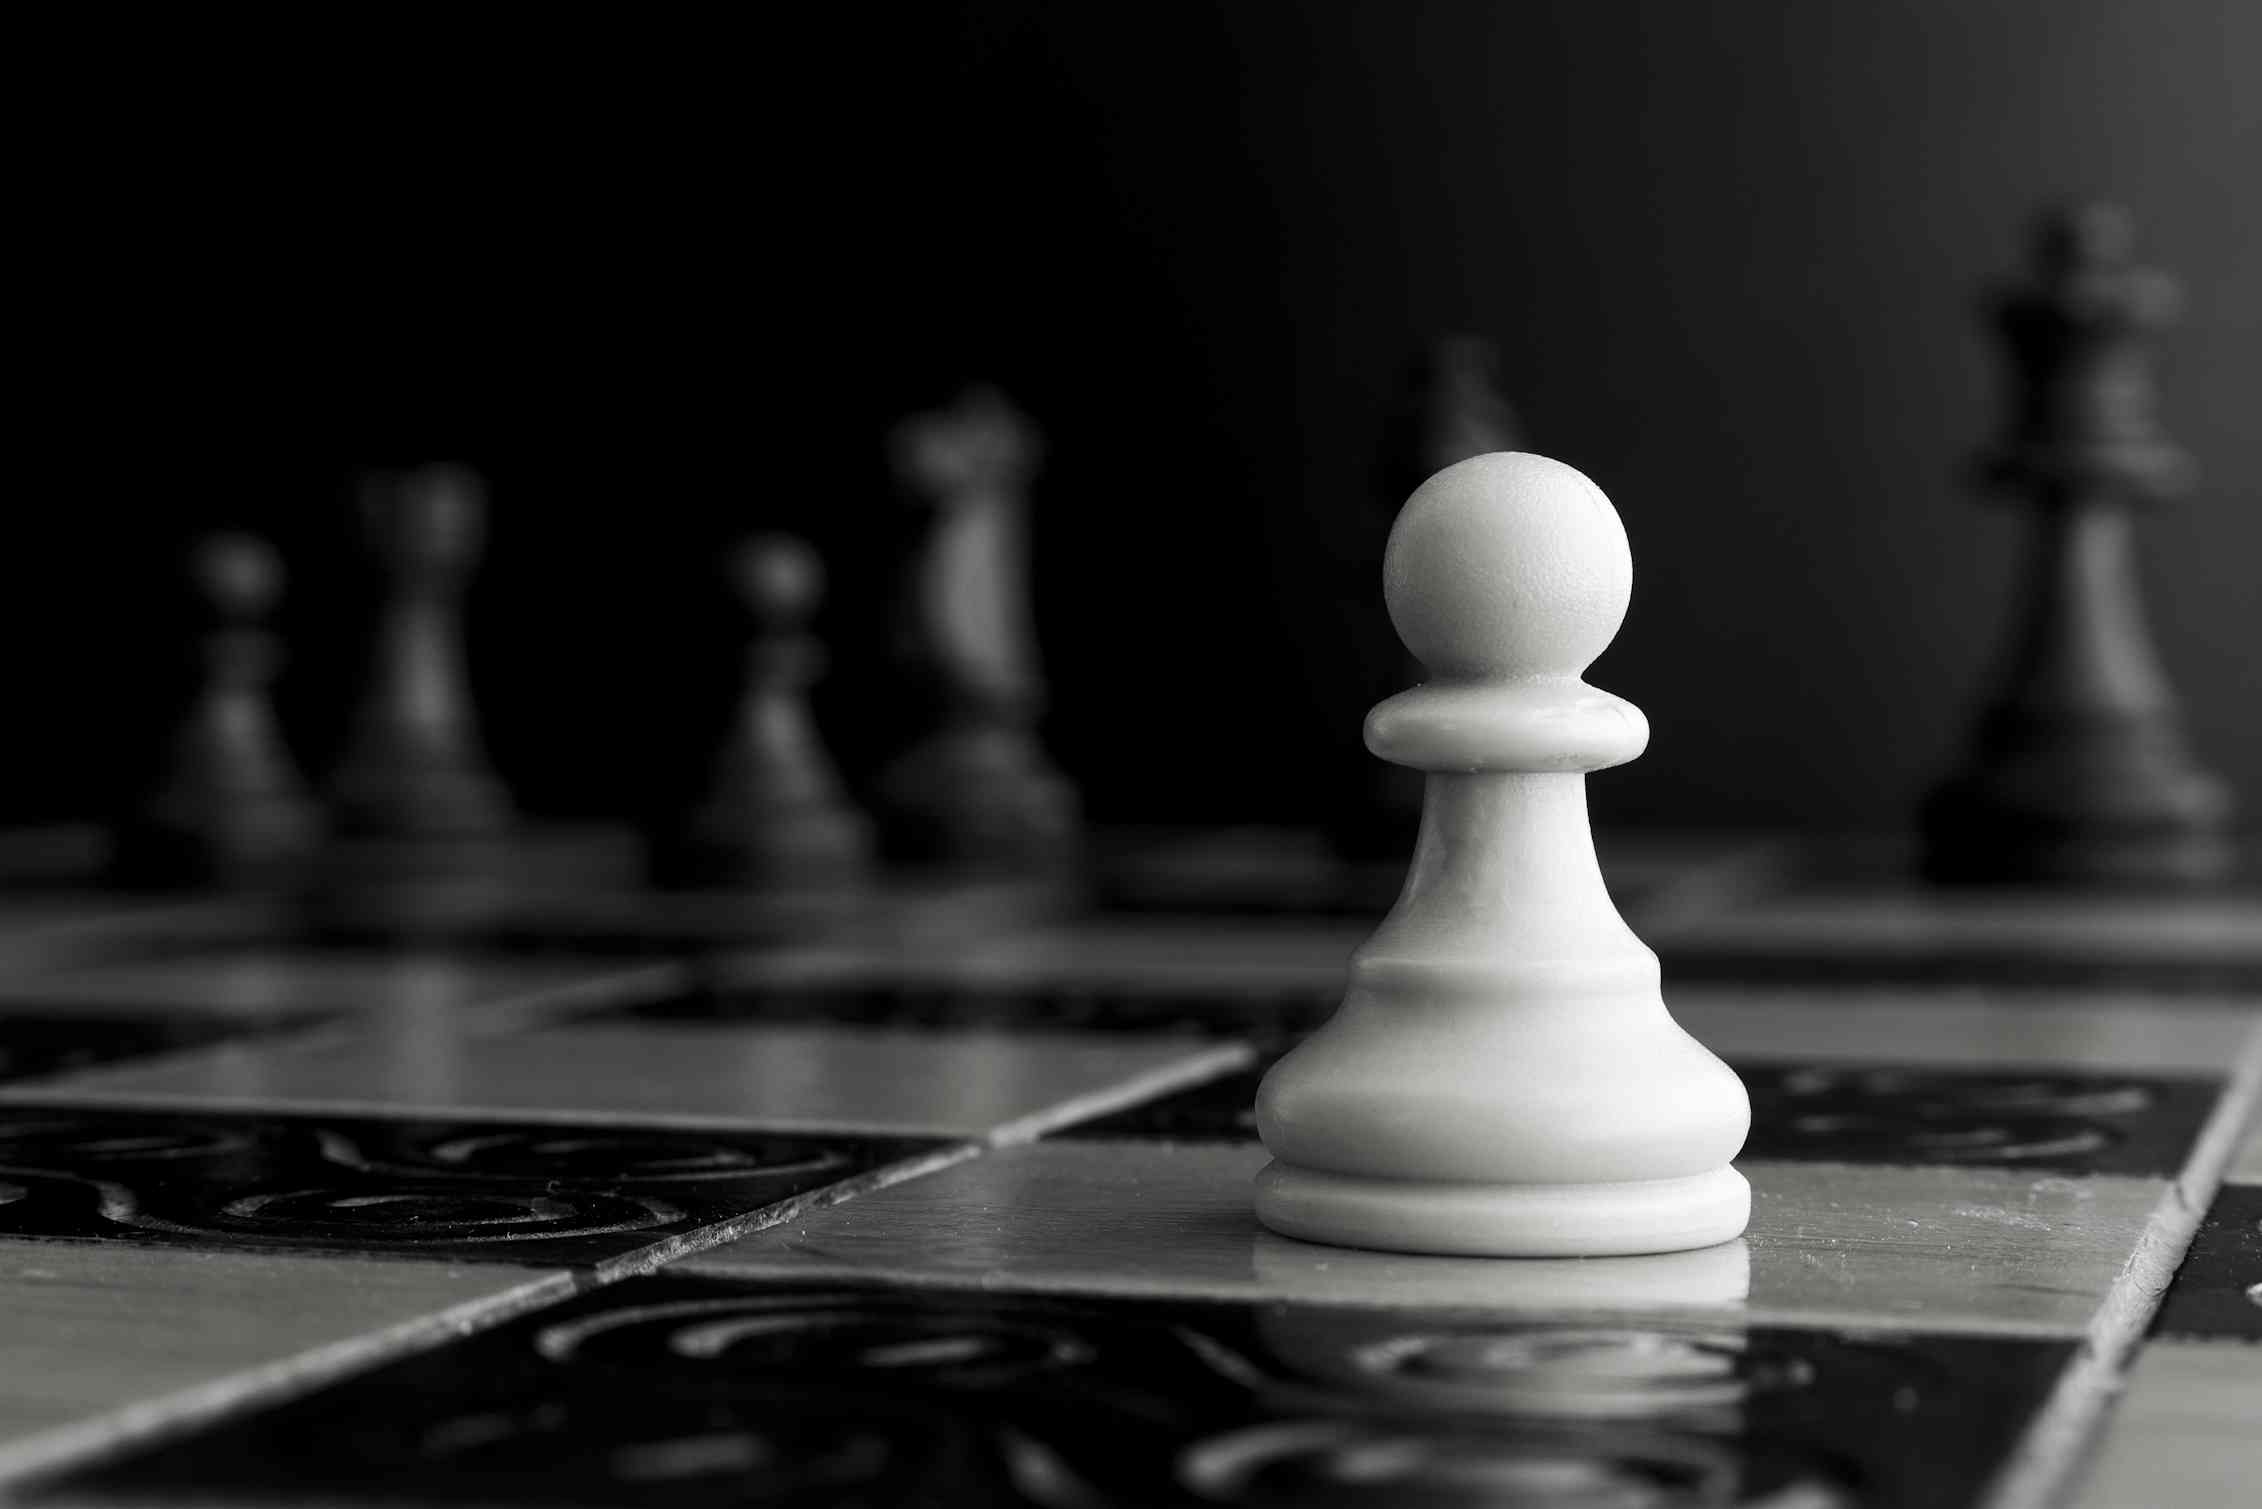 A white pawn on a chessboard.